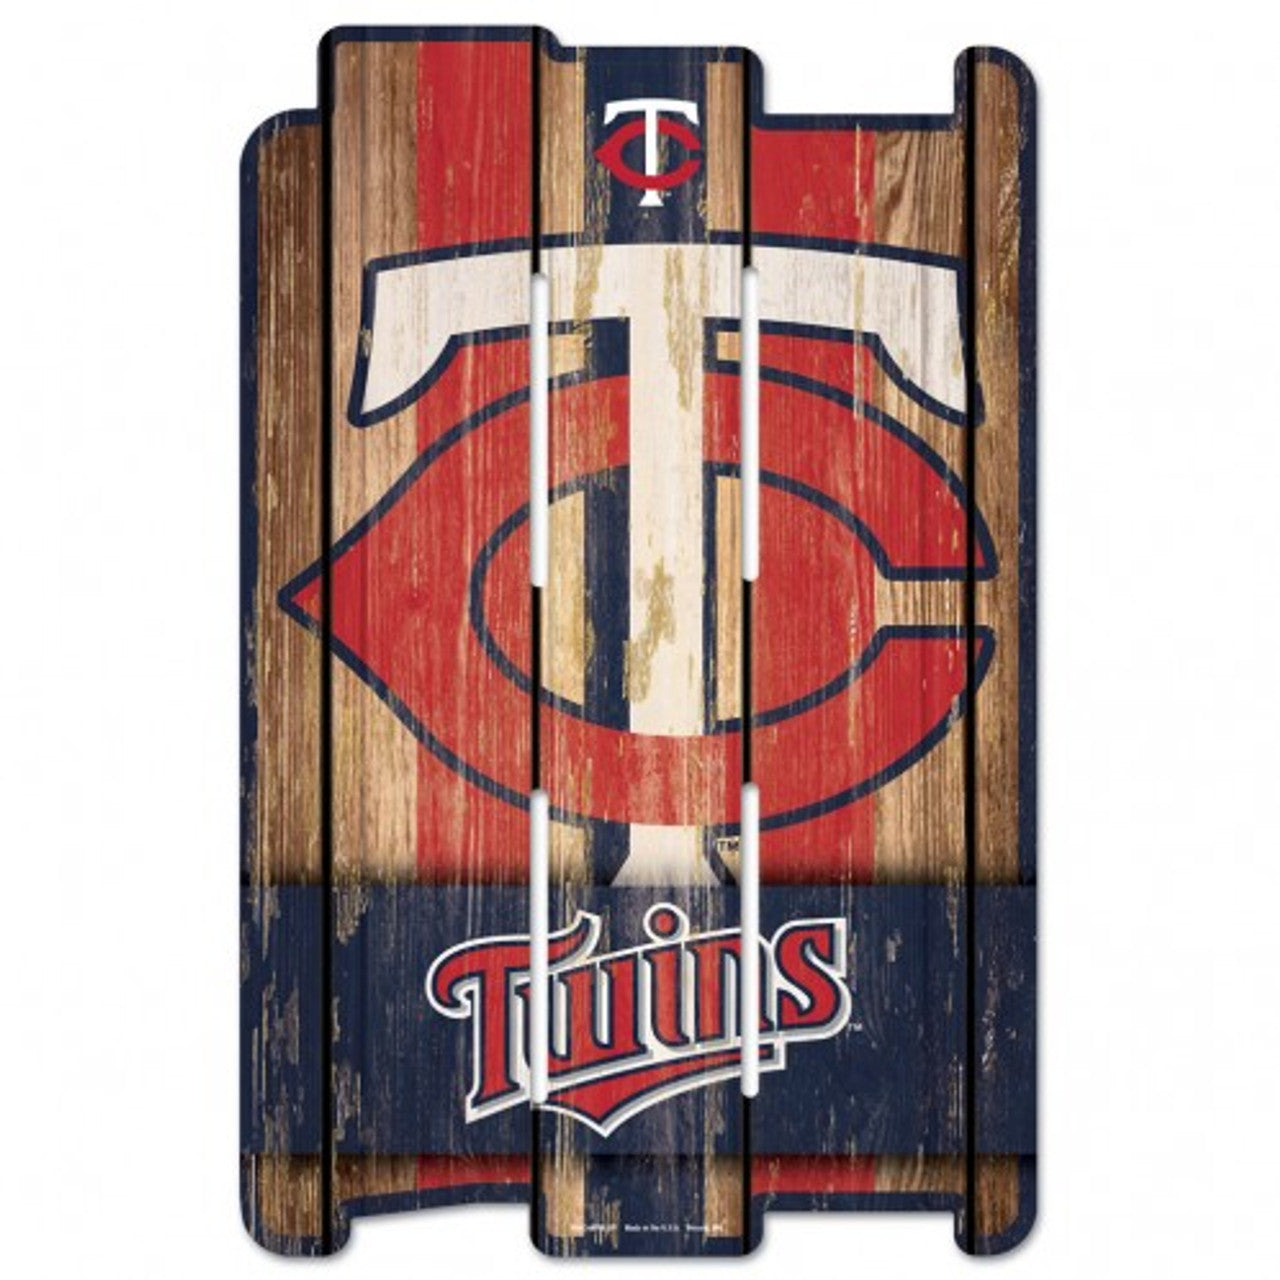 Minnesota Twins 11" x 17" Wood Fence Sign by Wincraft